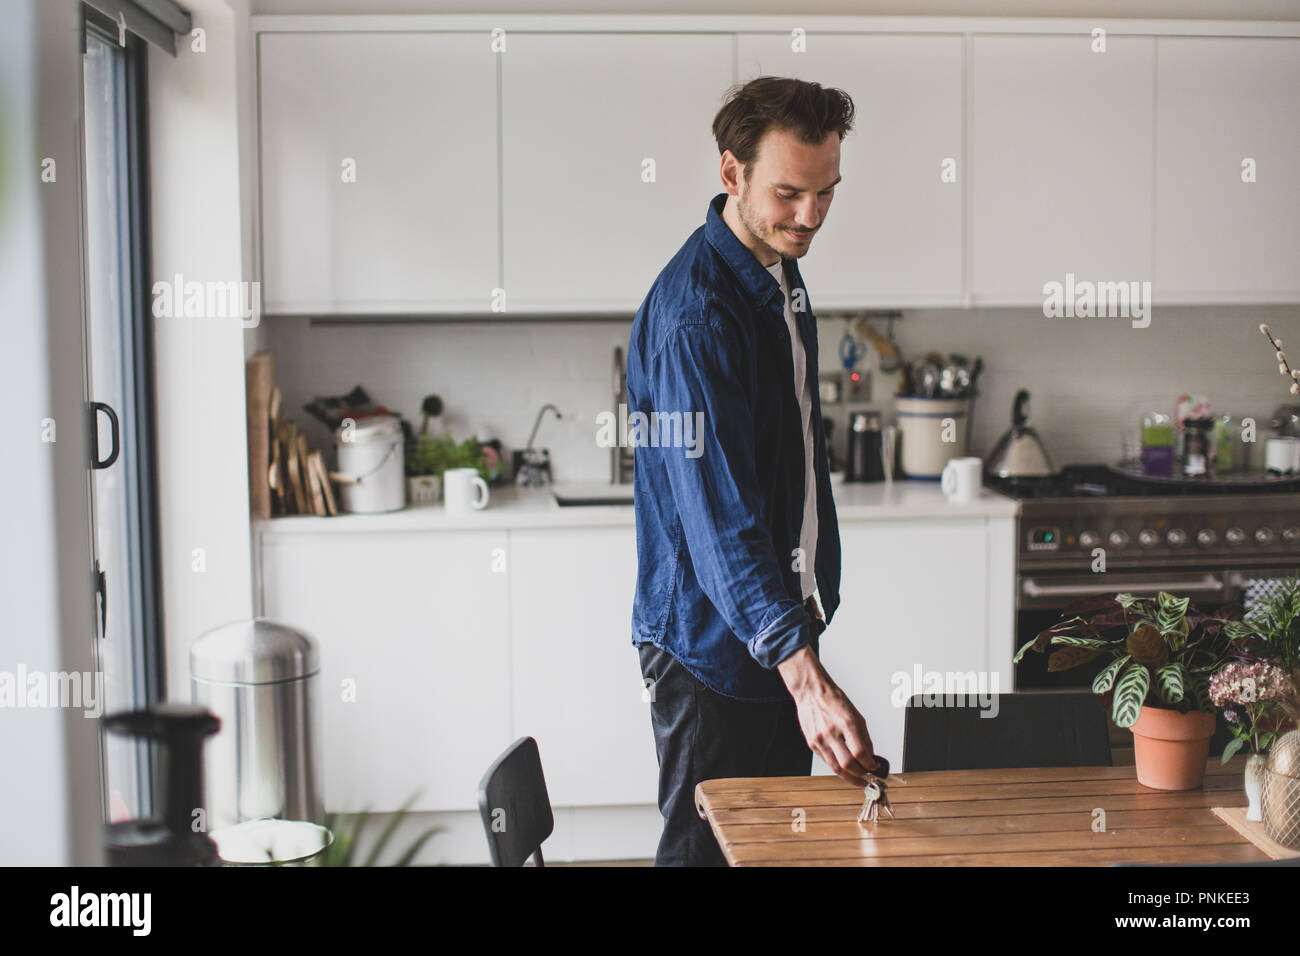 Adult male picking up keys from kitchen table Stock Photo